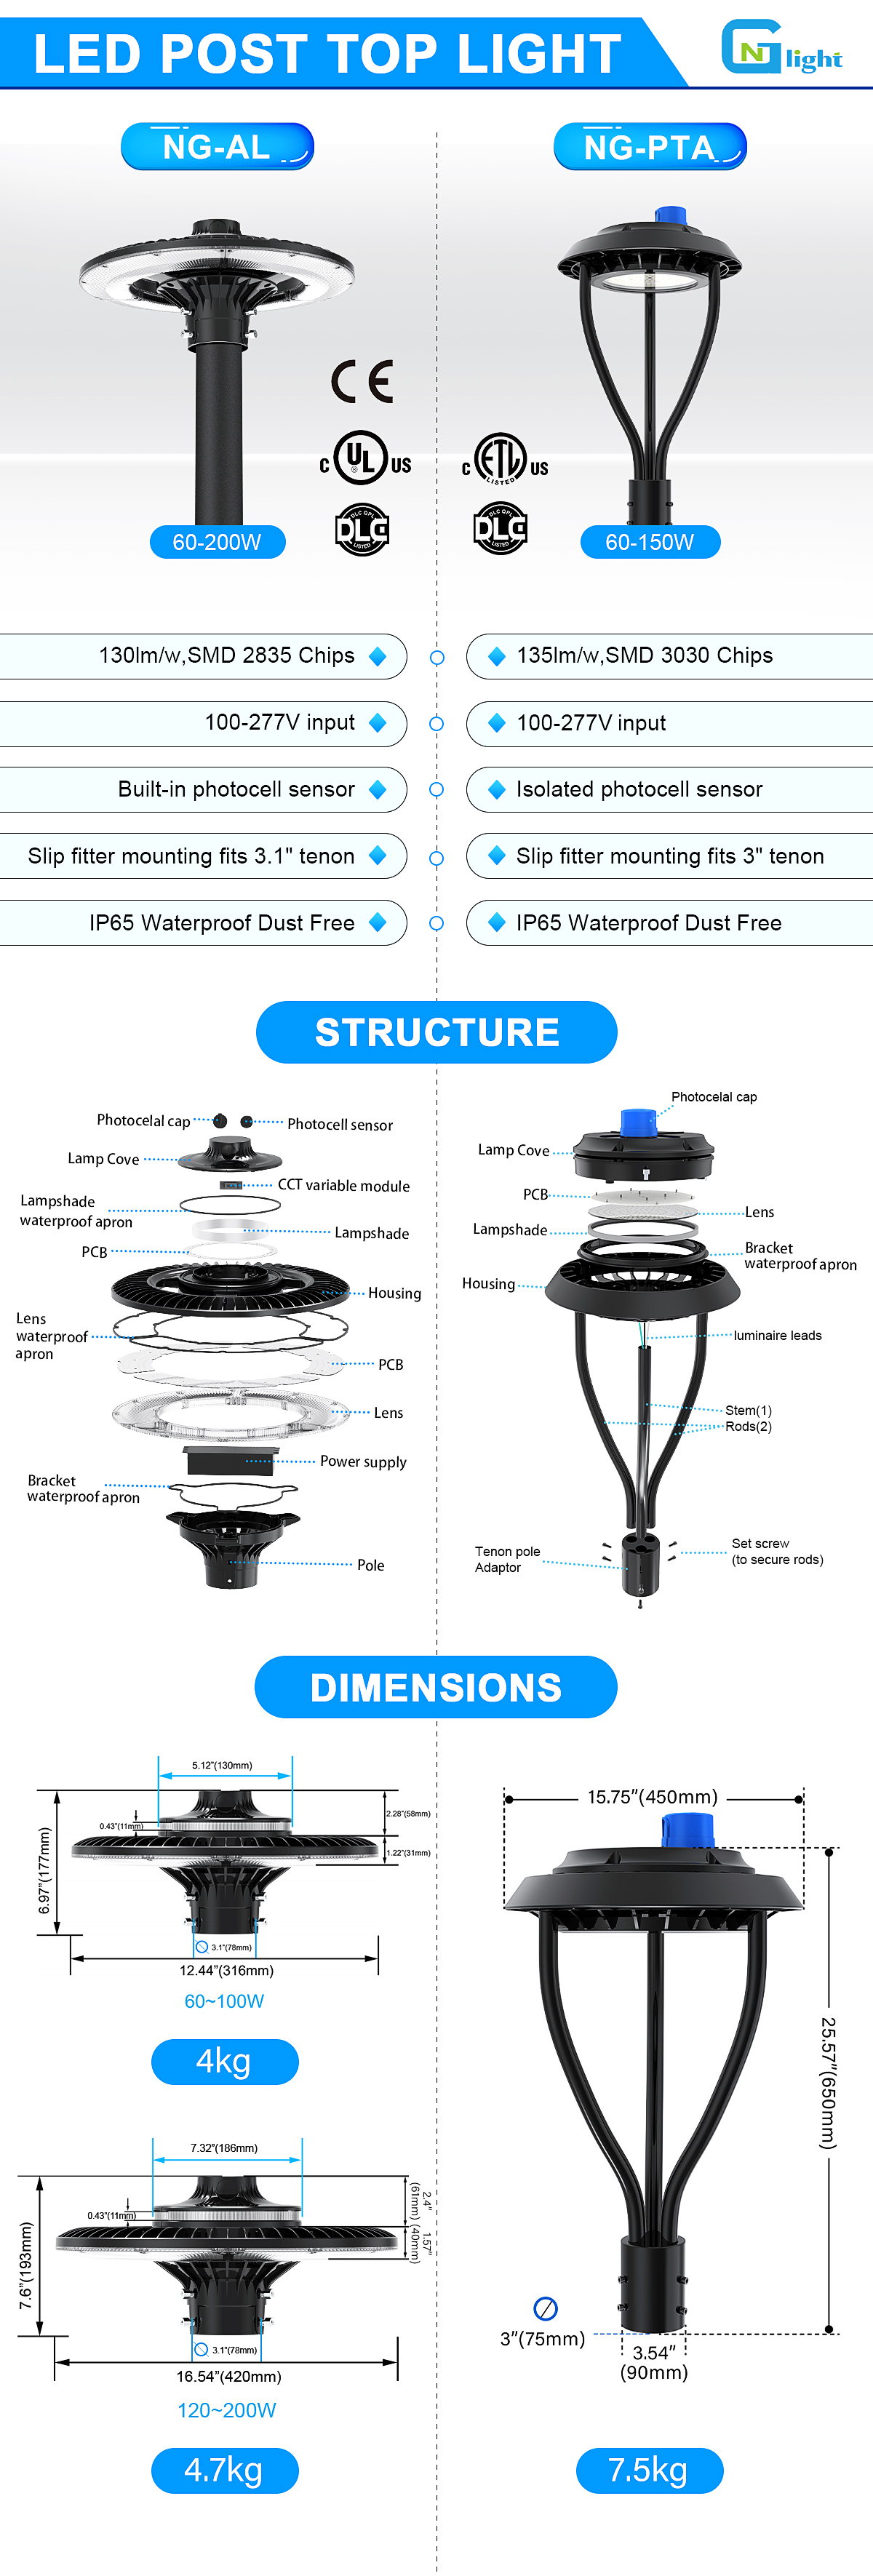 LED Post Top Light, 5 Years Warranty